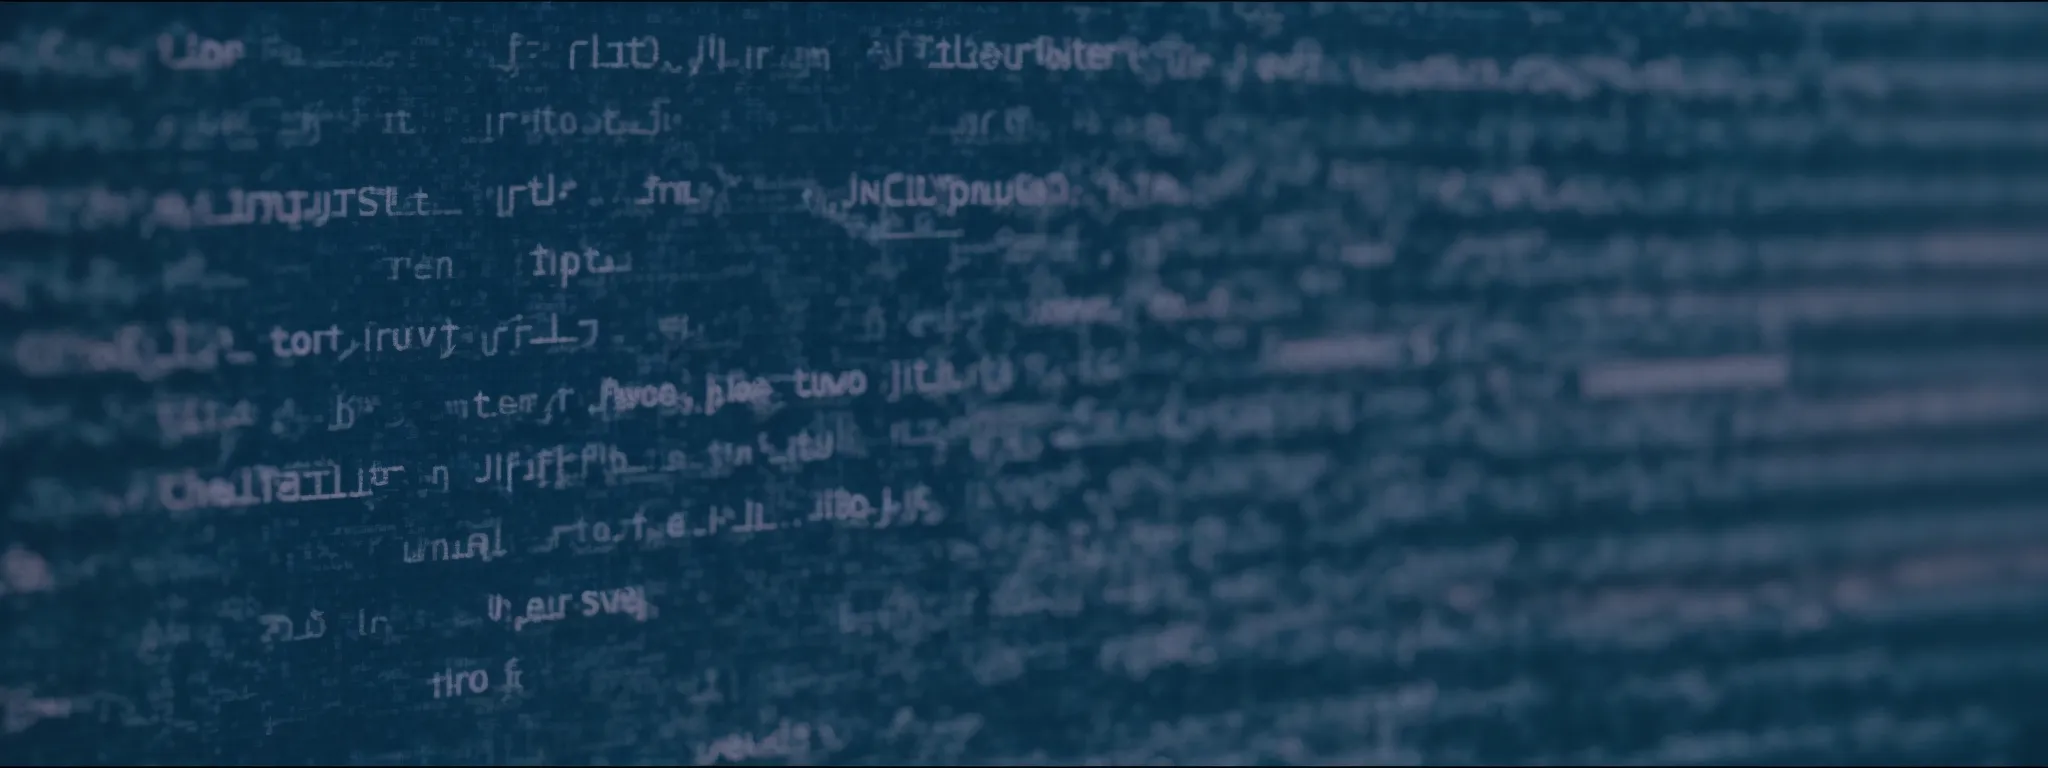 a close-up of a computer screen displaying hyperlinked texts amidst a web development code environment.